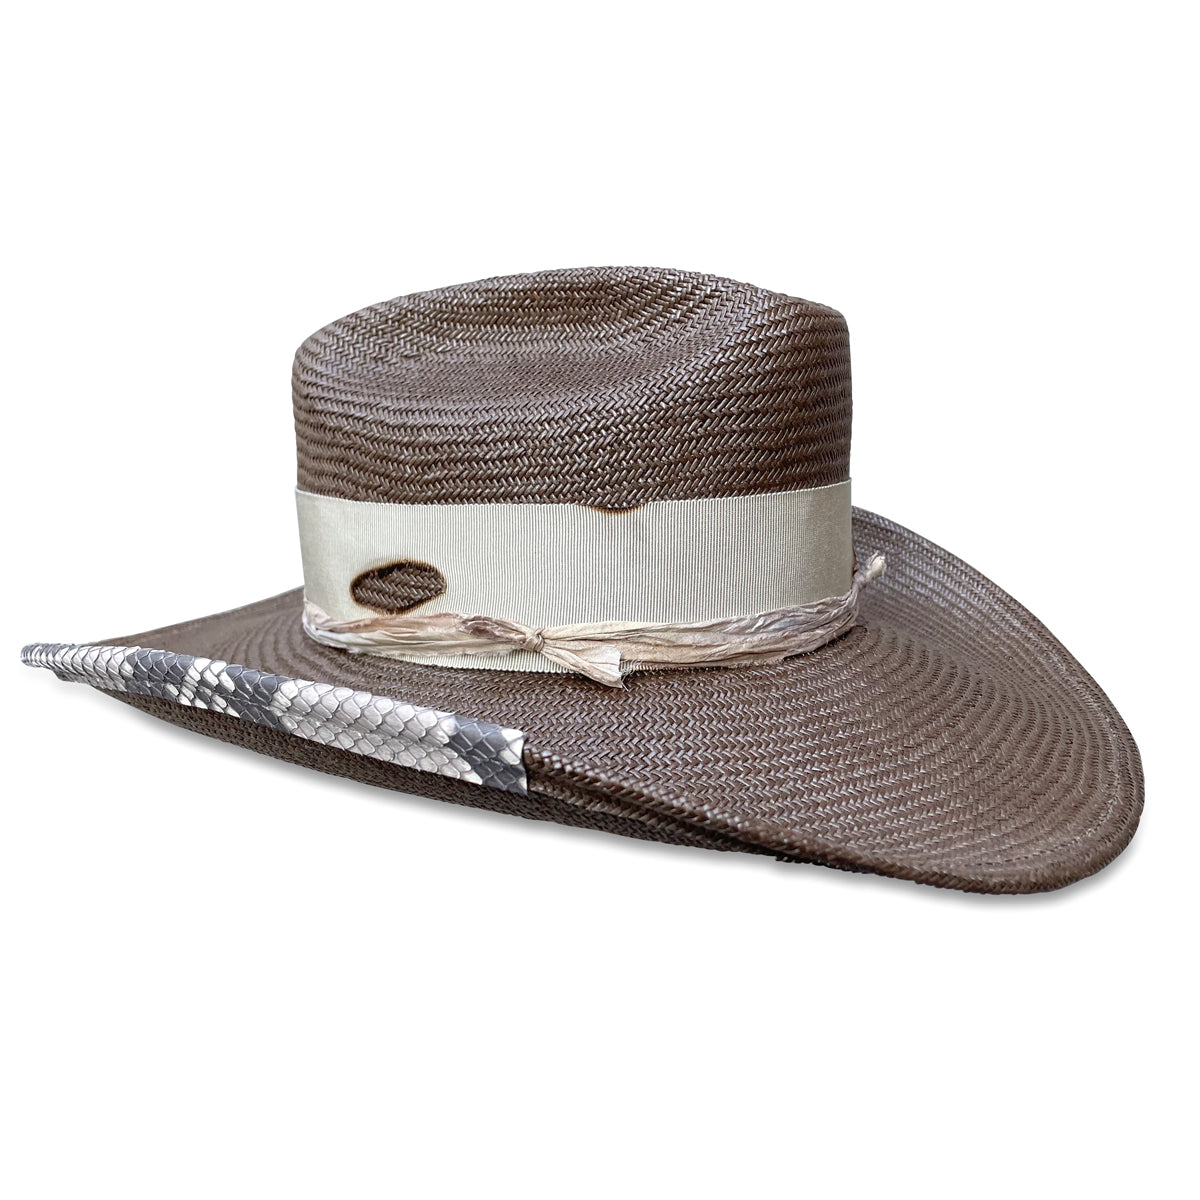 The La Petite Chatte cowboy hat in a rich chocolate hue, featuring a snakeskin band and a distinctive feather detail. Made to order by Cha Cha's House of Ill repute, a woman-owned millinery in New York City